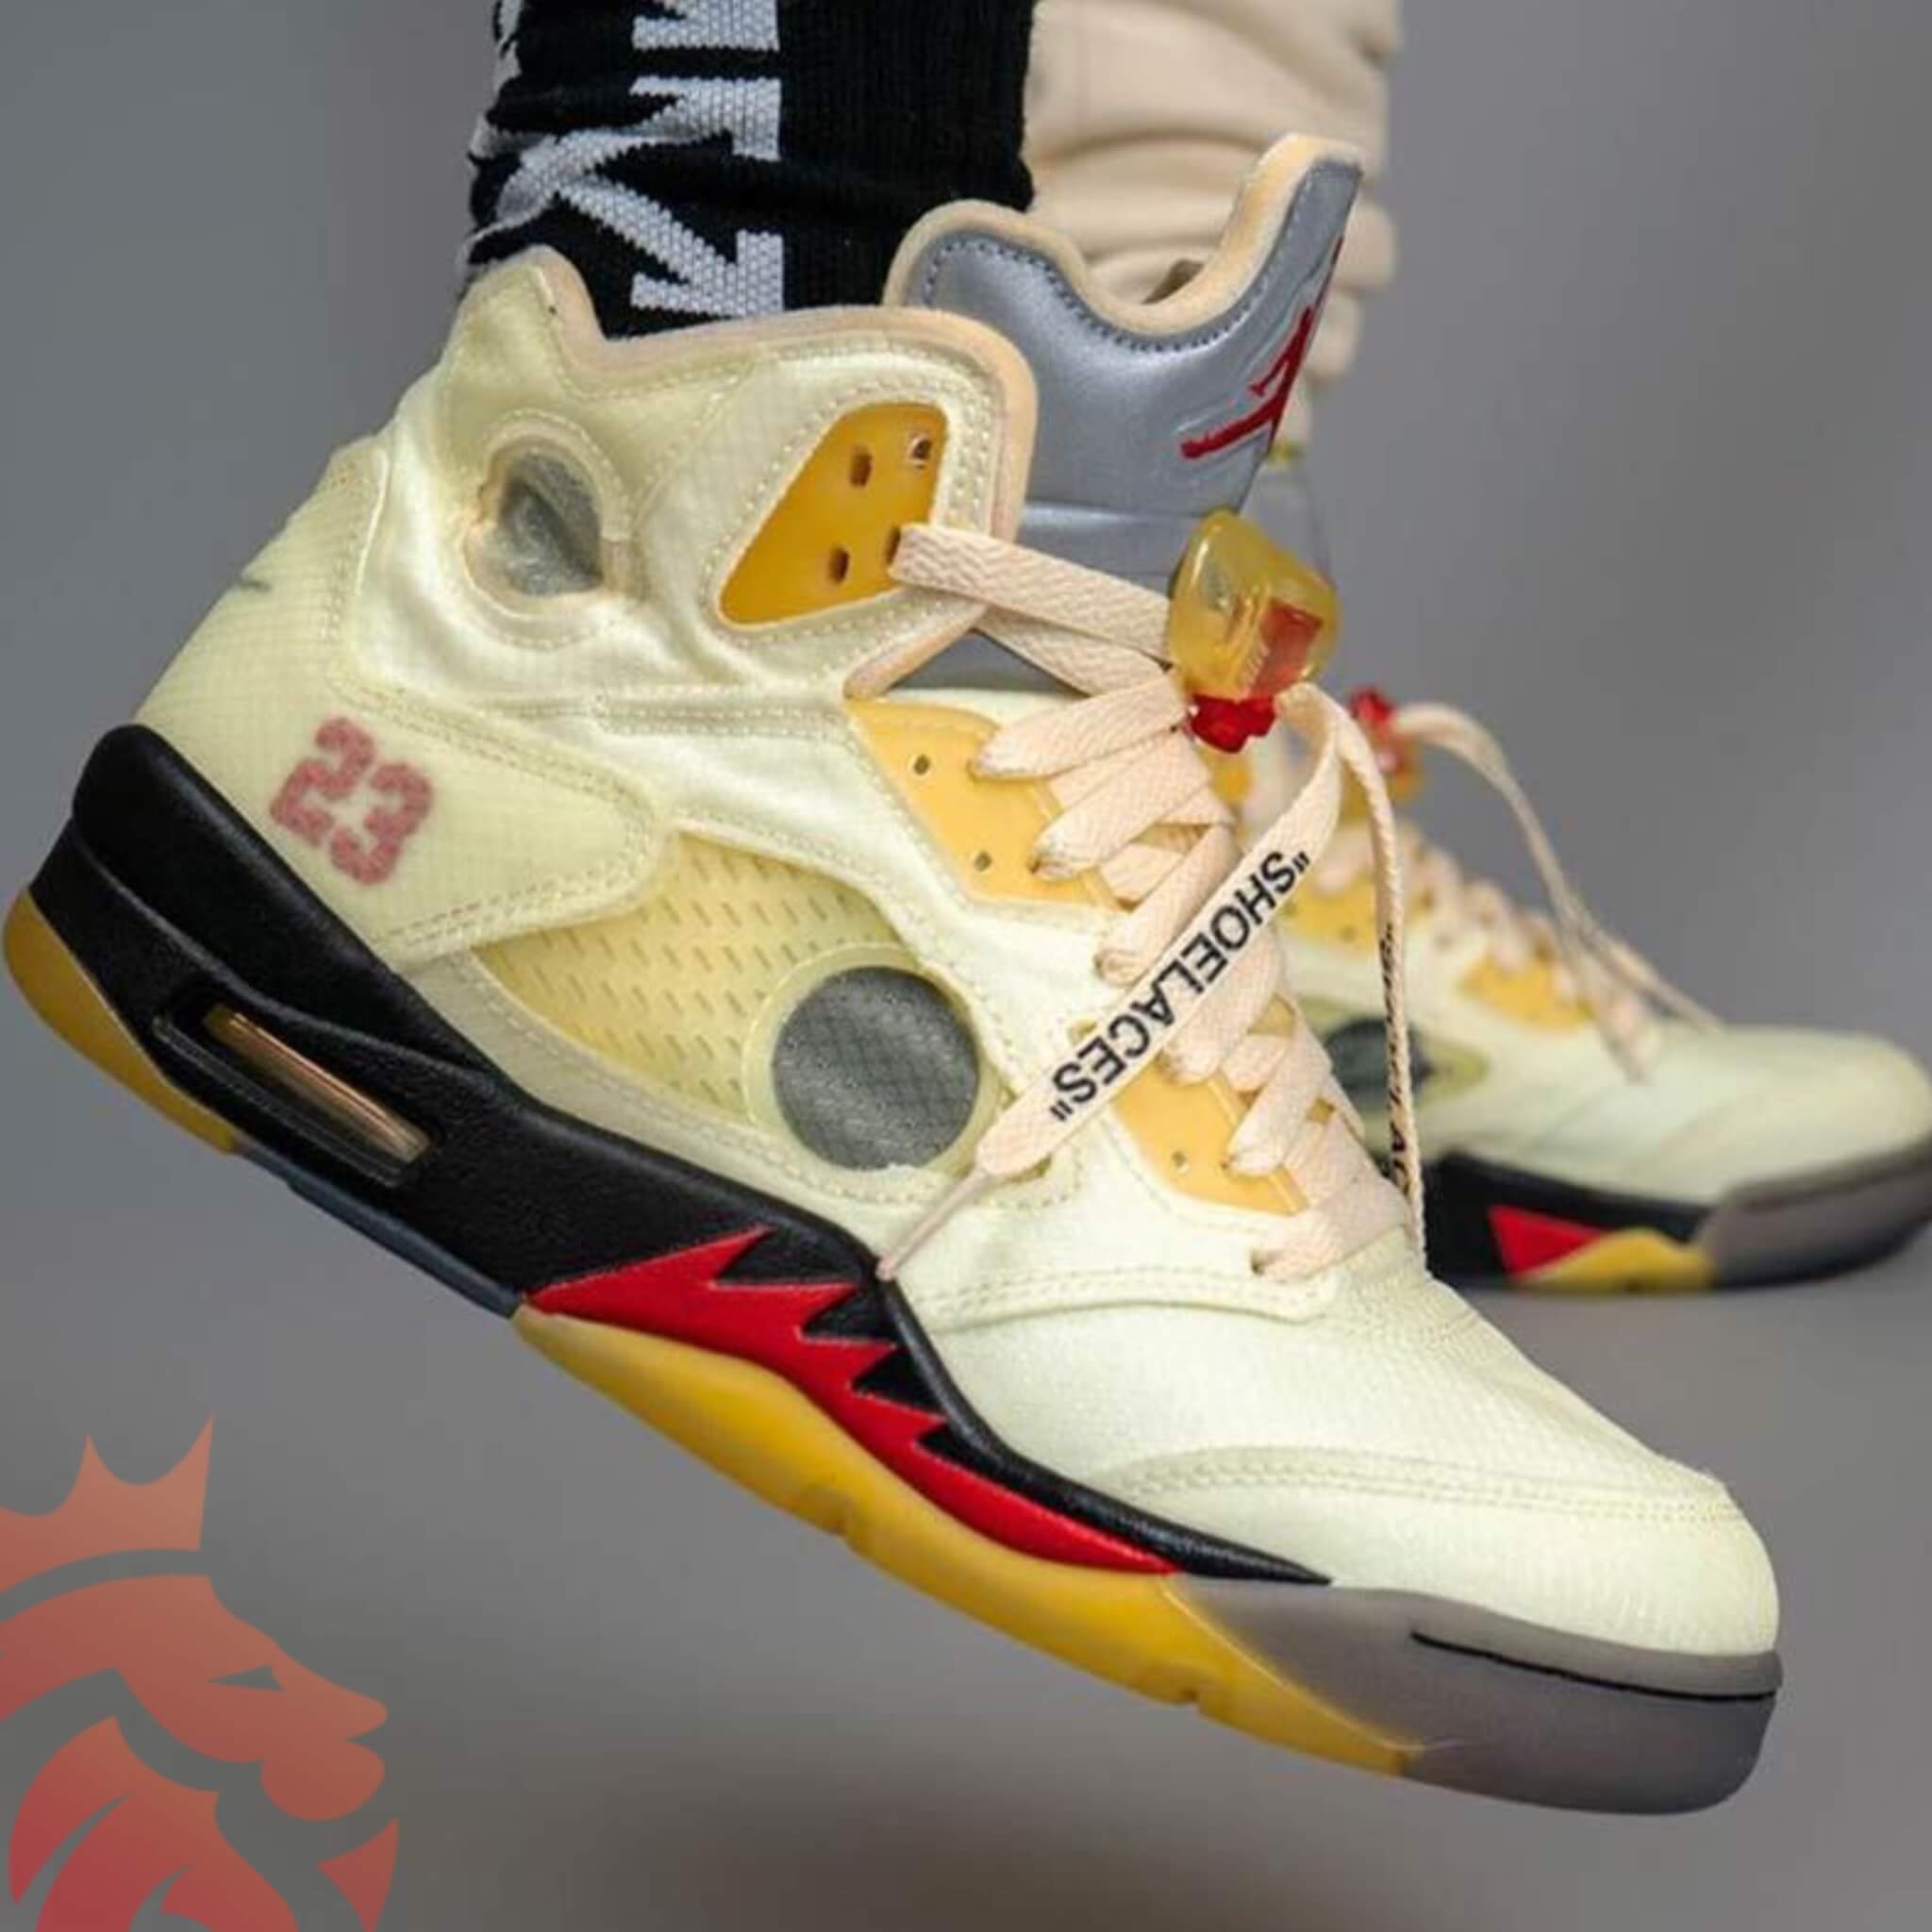 The Off-White x Air Jordan 5 Has An Official Release Date